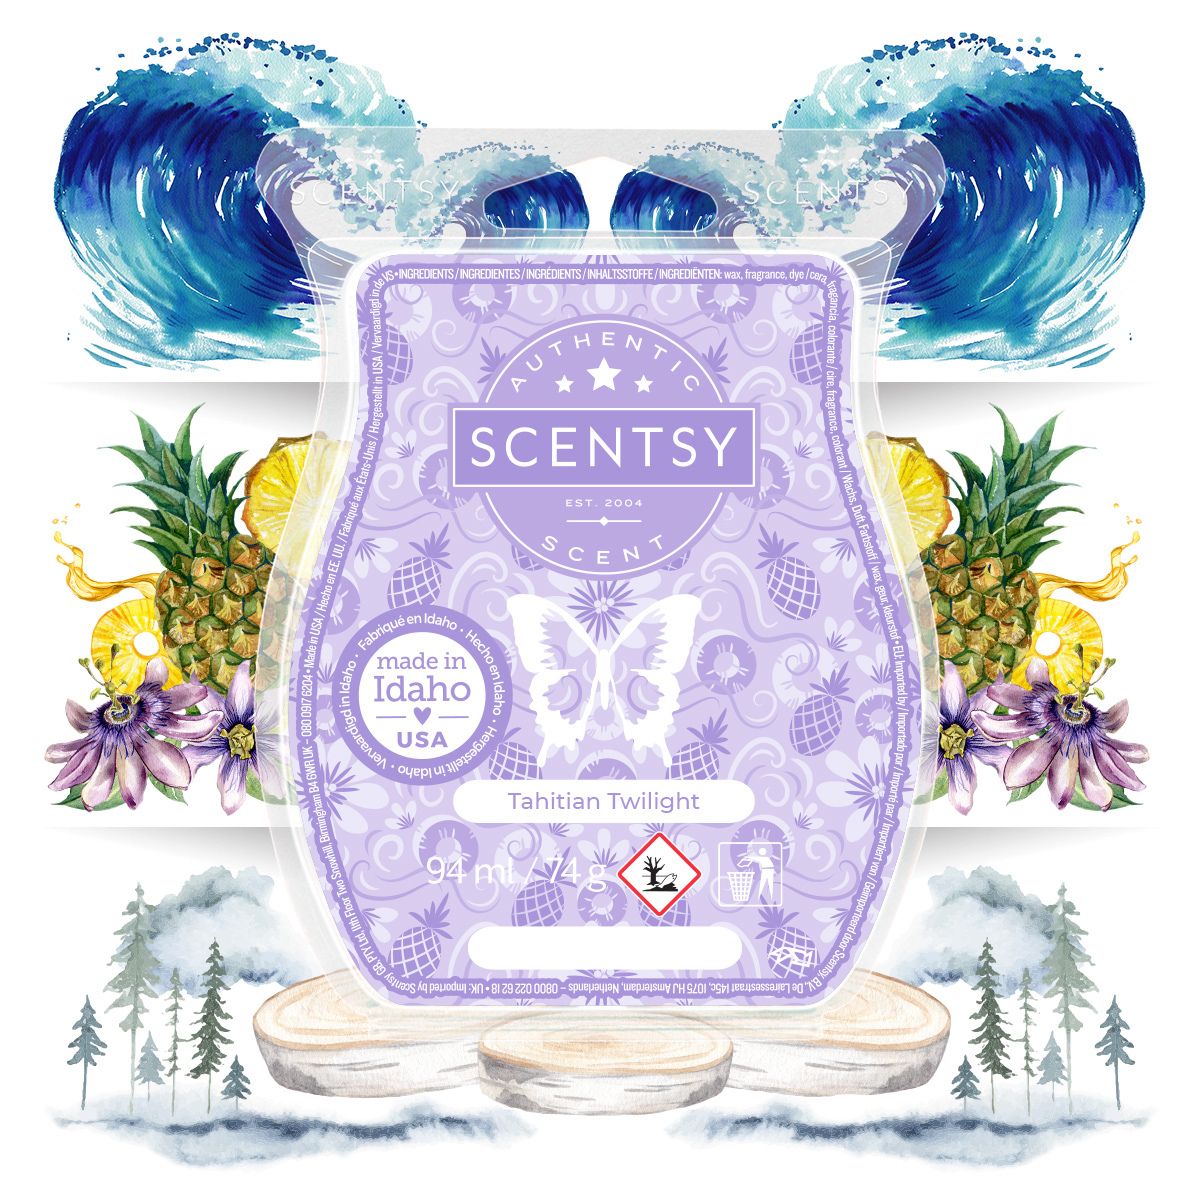 Tahitian Twilight Scentsy Bar - Scentsy® Online Store